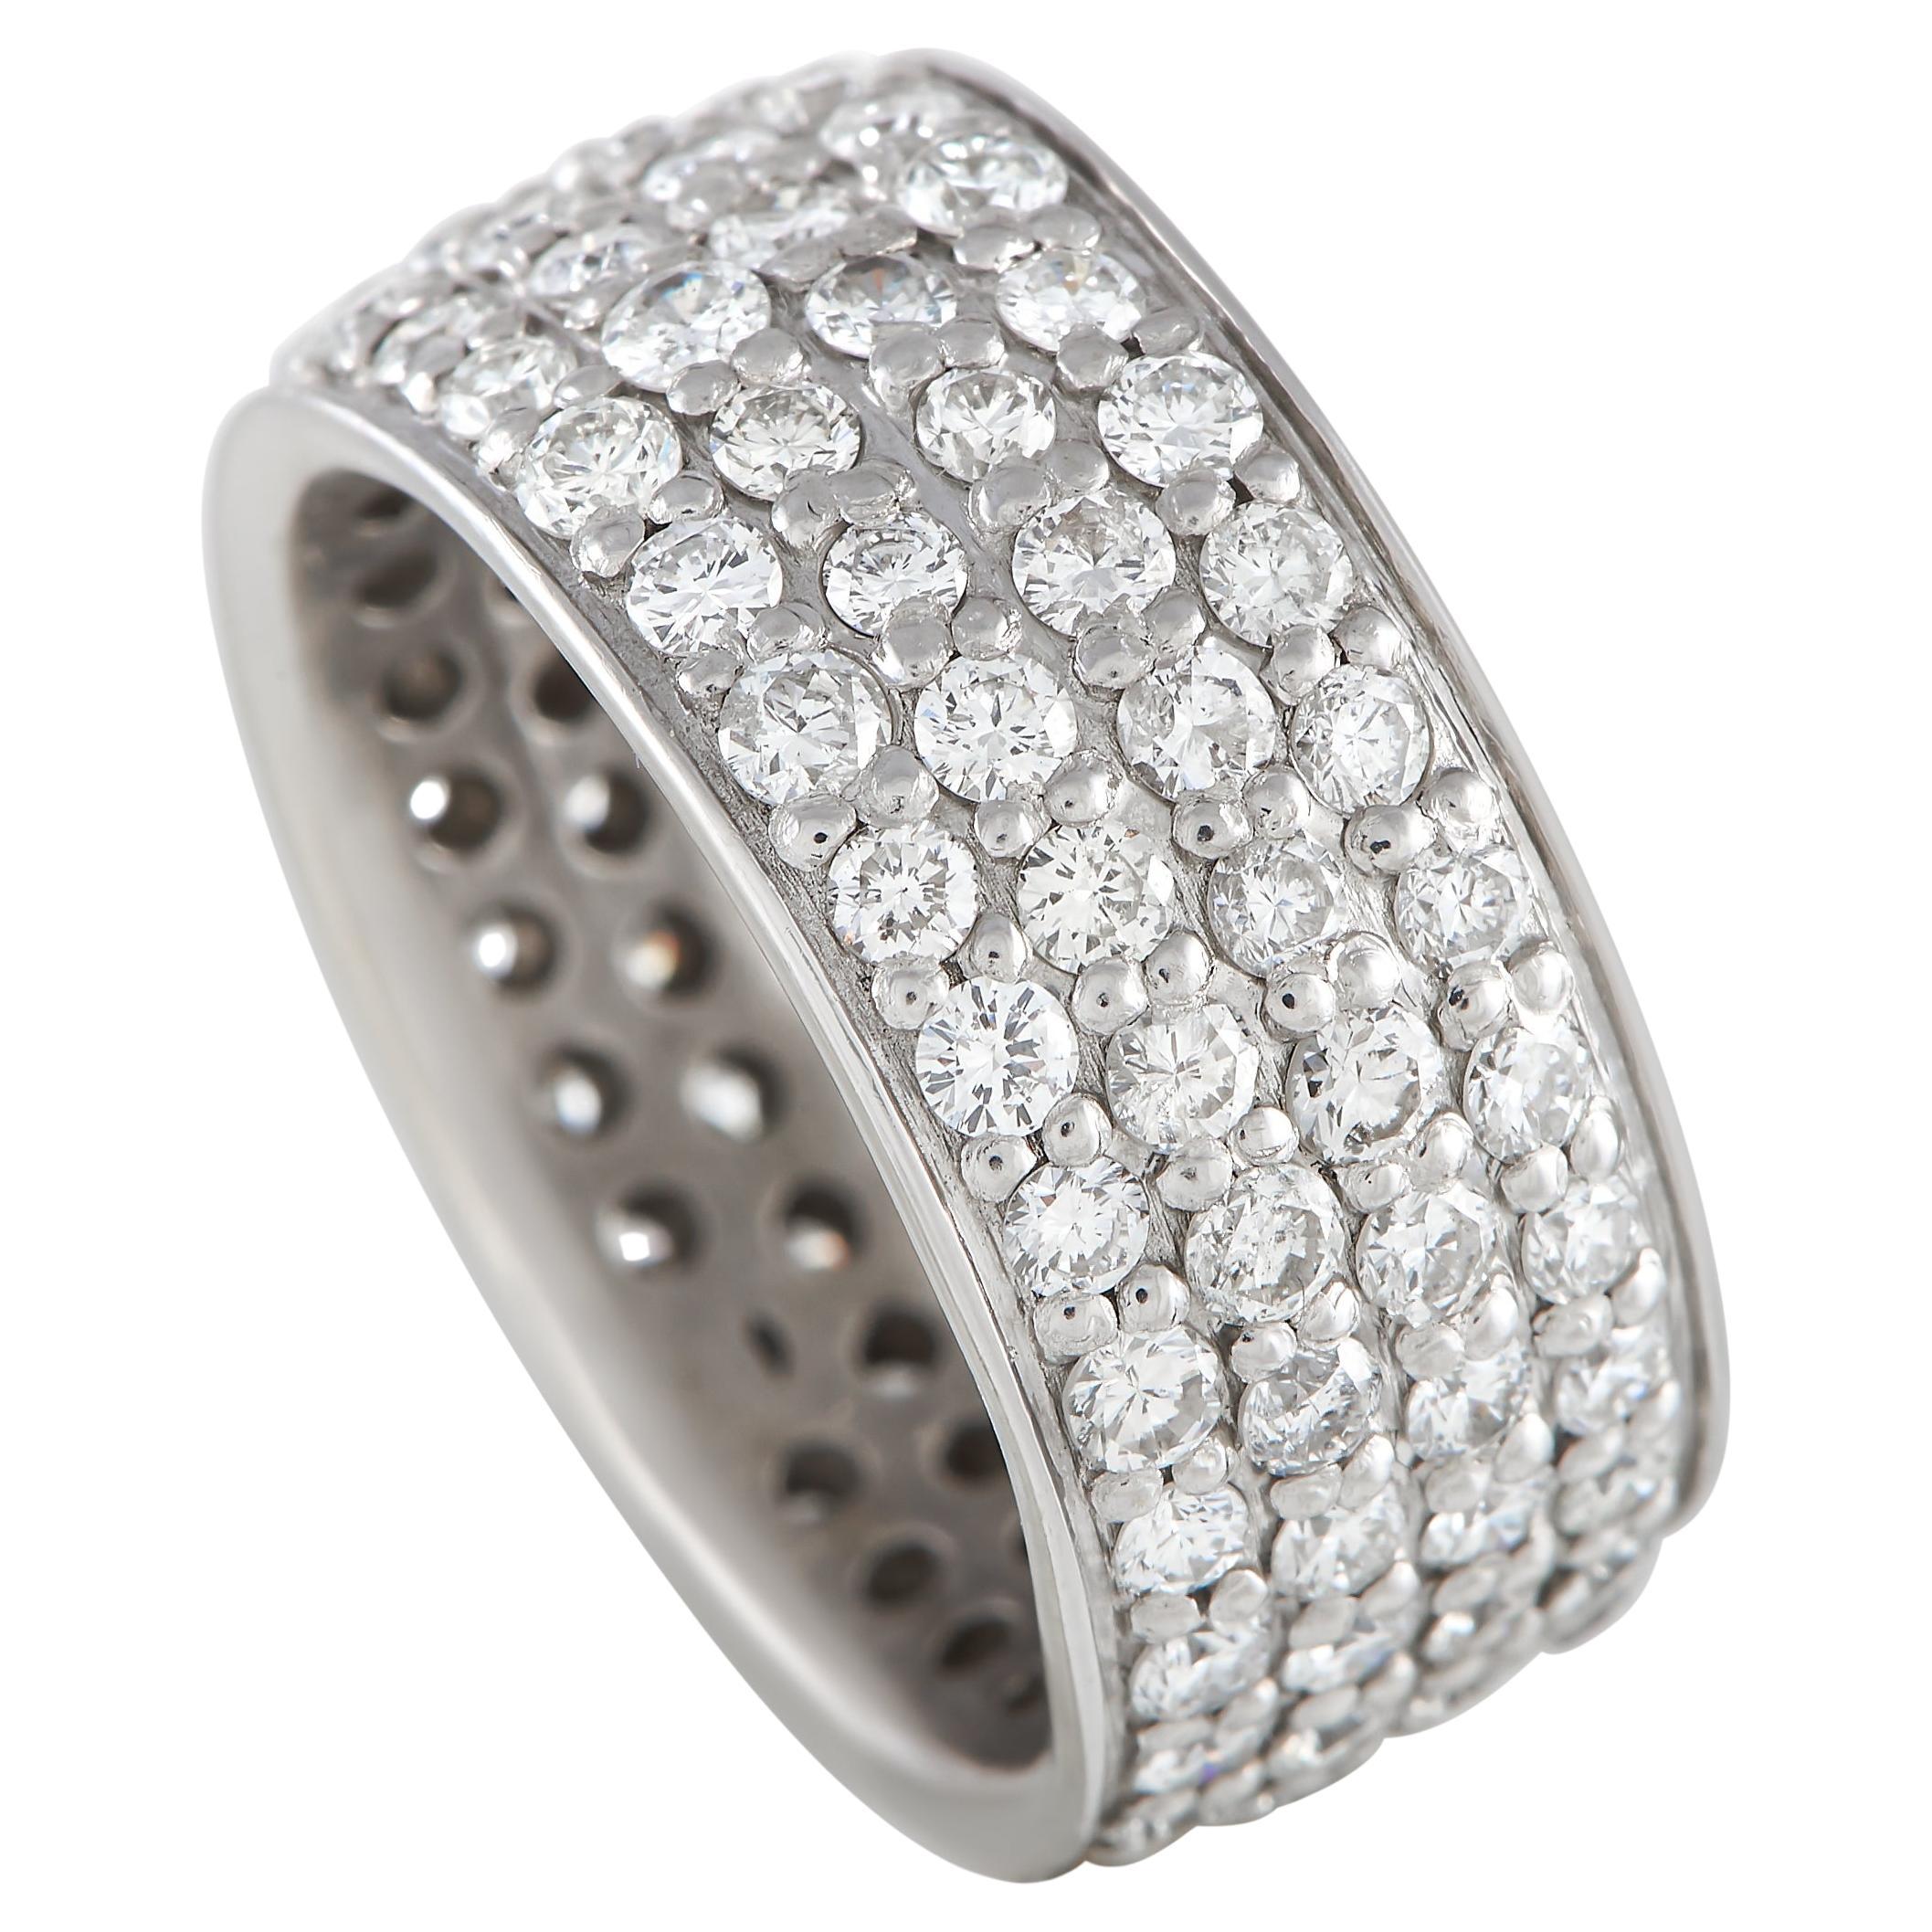 LB Exclusive Platinum 3.0 Carat Diamond Wide Band Ring For Sale